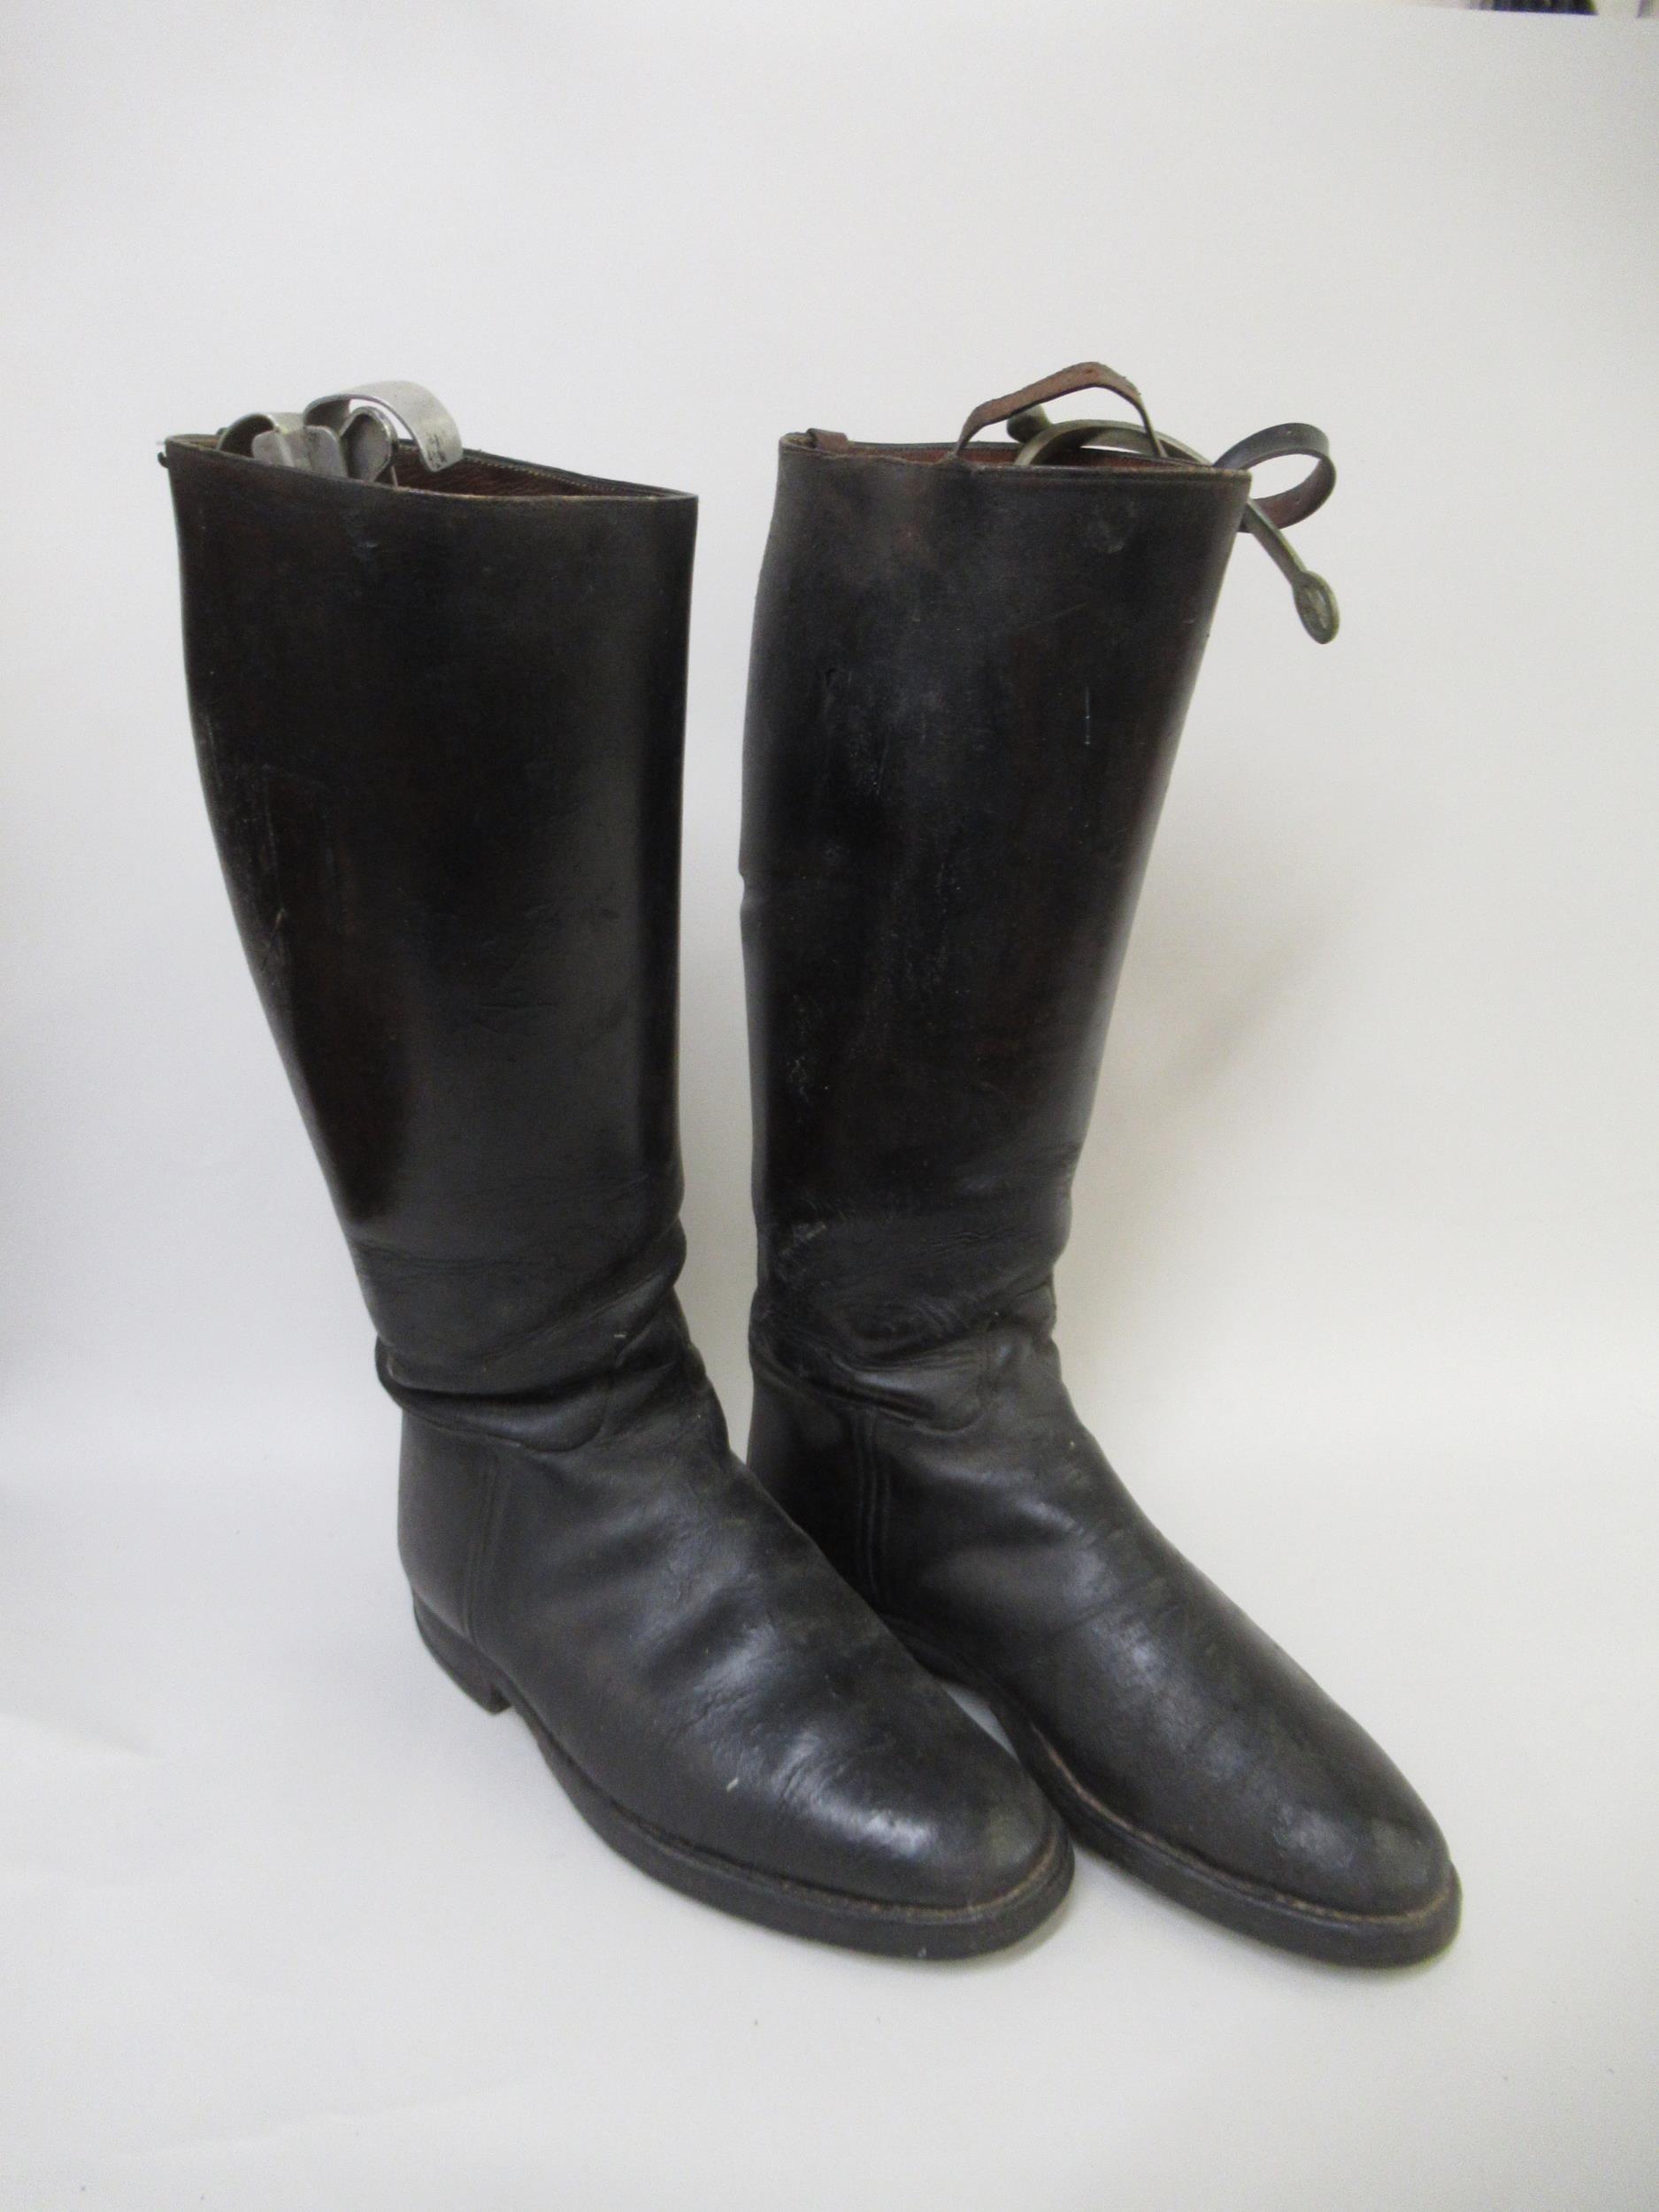 Pair of black leather riding boots with spurs